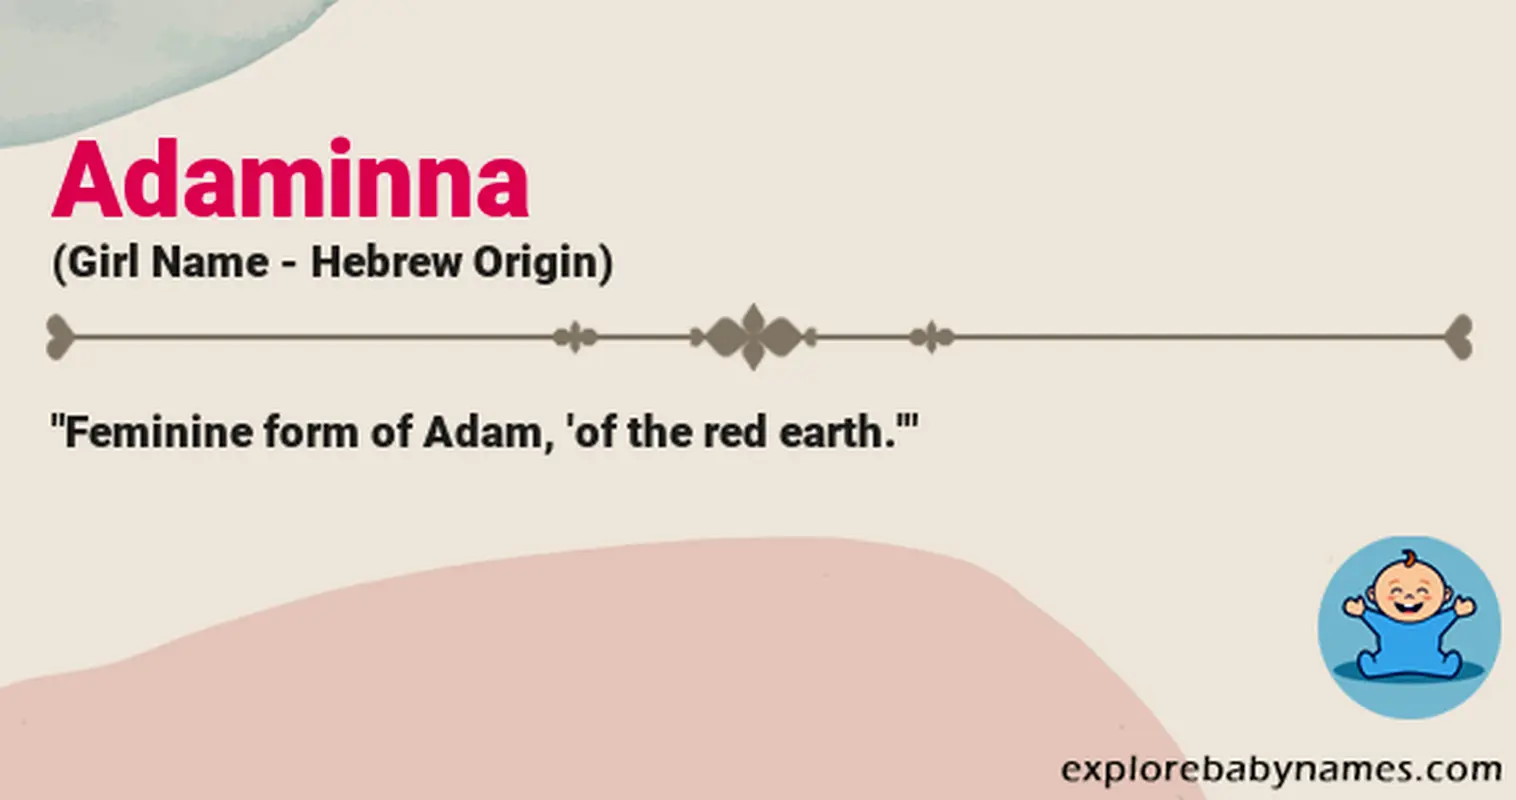 Meaning of Adaminna